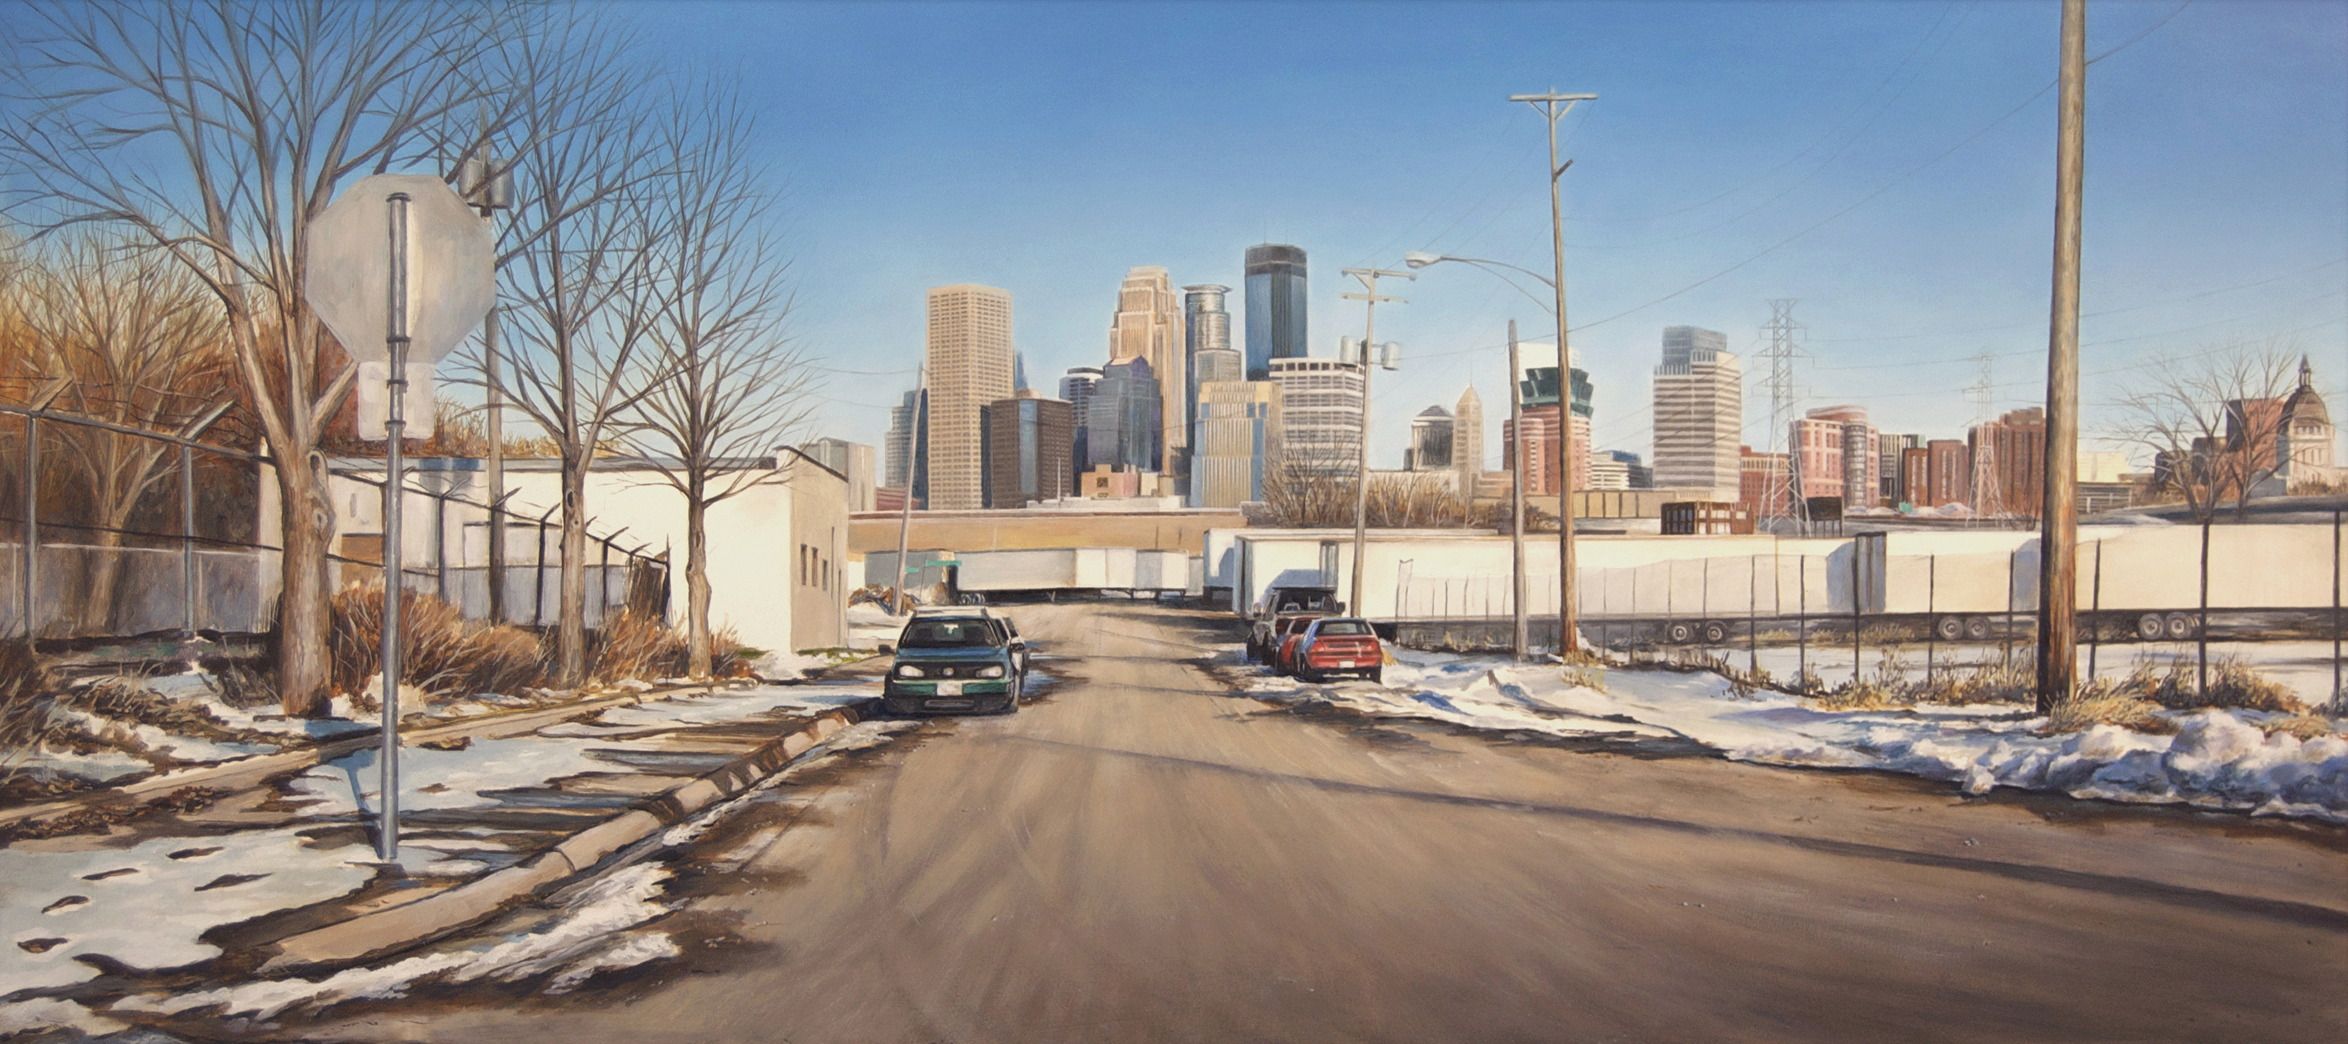   View toward Minneapolis from    Currie Avenue West, Winter   2014  Oil on panel  14.5 x 32 inches    